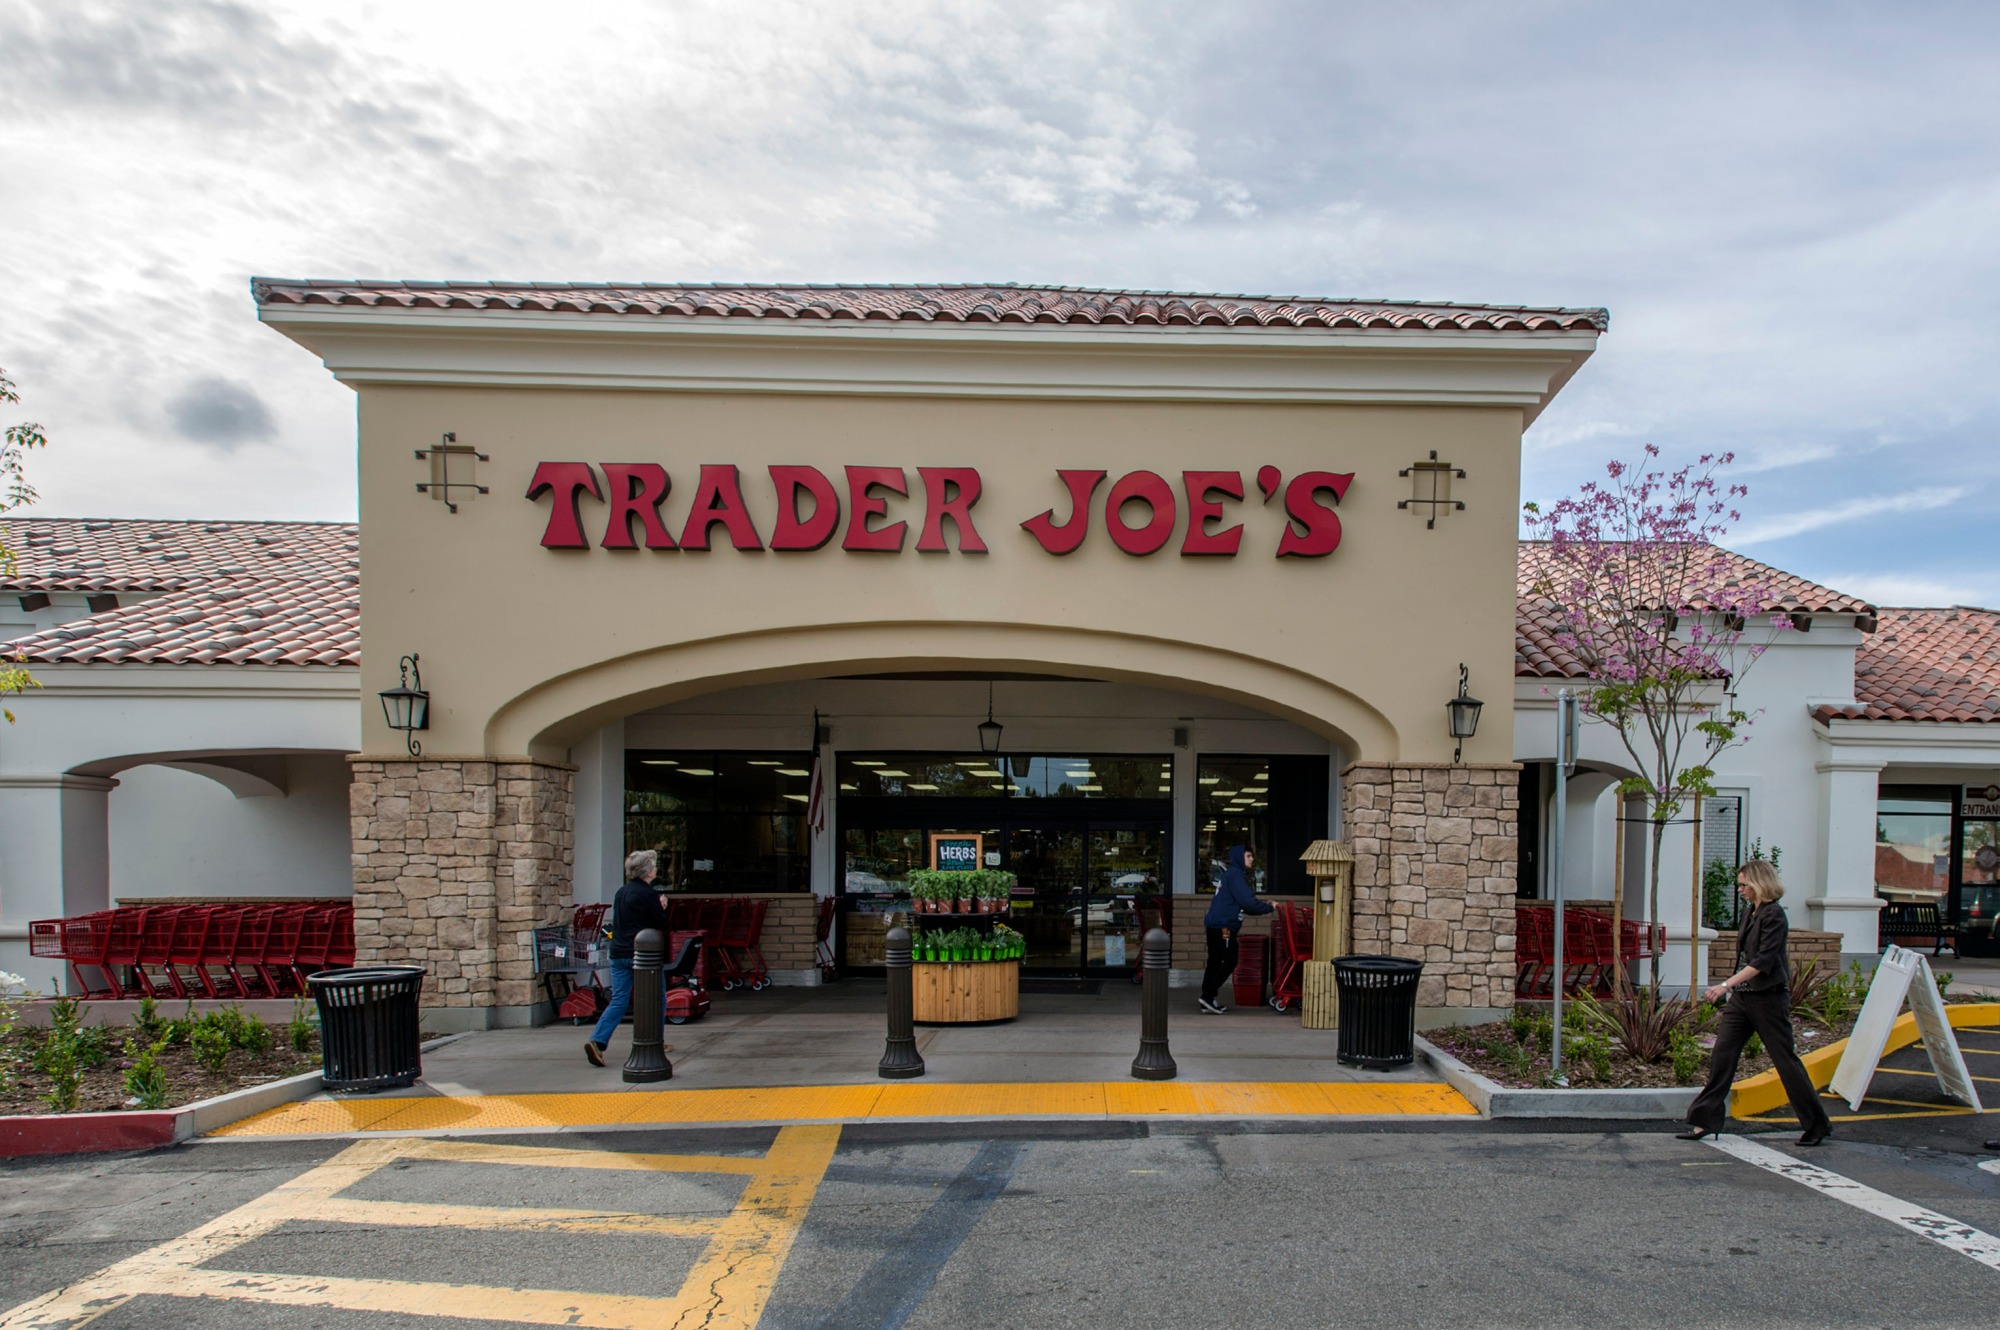 Man who robbed Trader Joe’s in OC, San Fernando and San Gabriel valleys, South Bay and IE to be sentenced